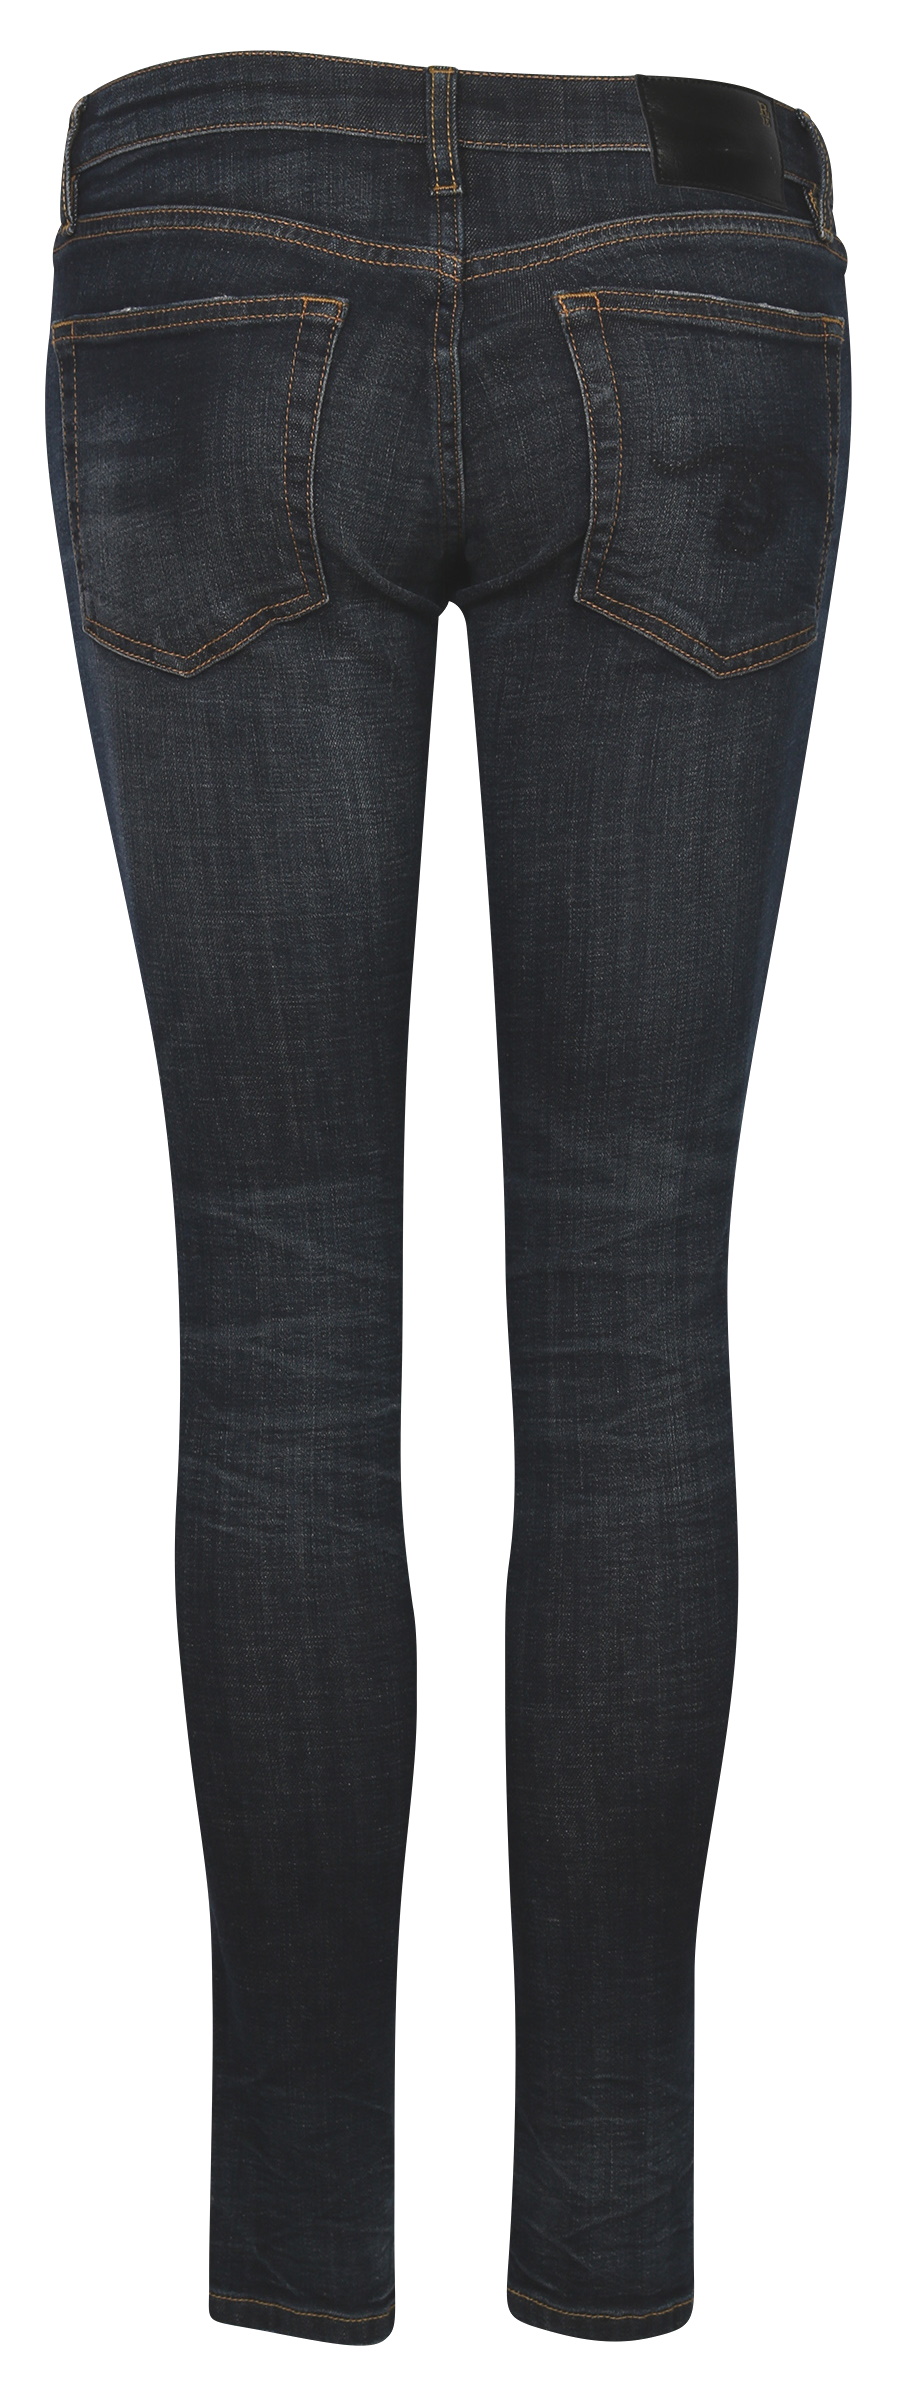 R13 Jeans Kate Howell Blue Washed 25